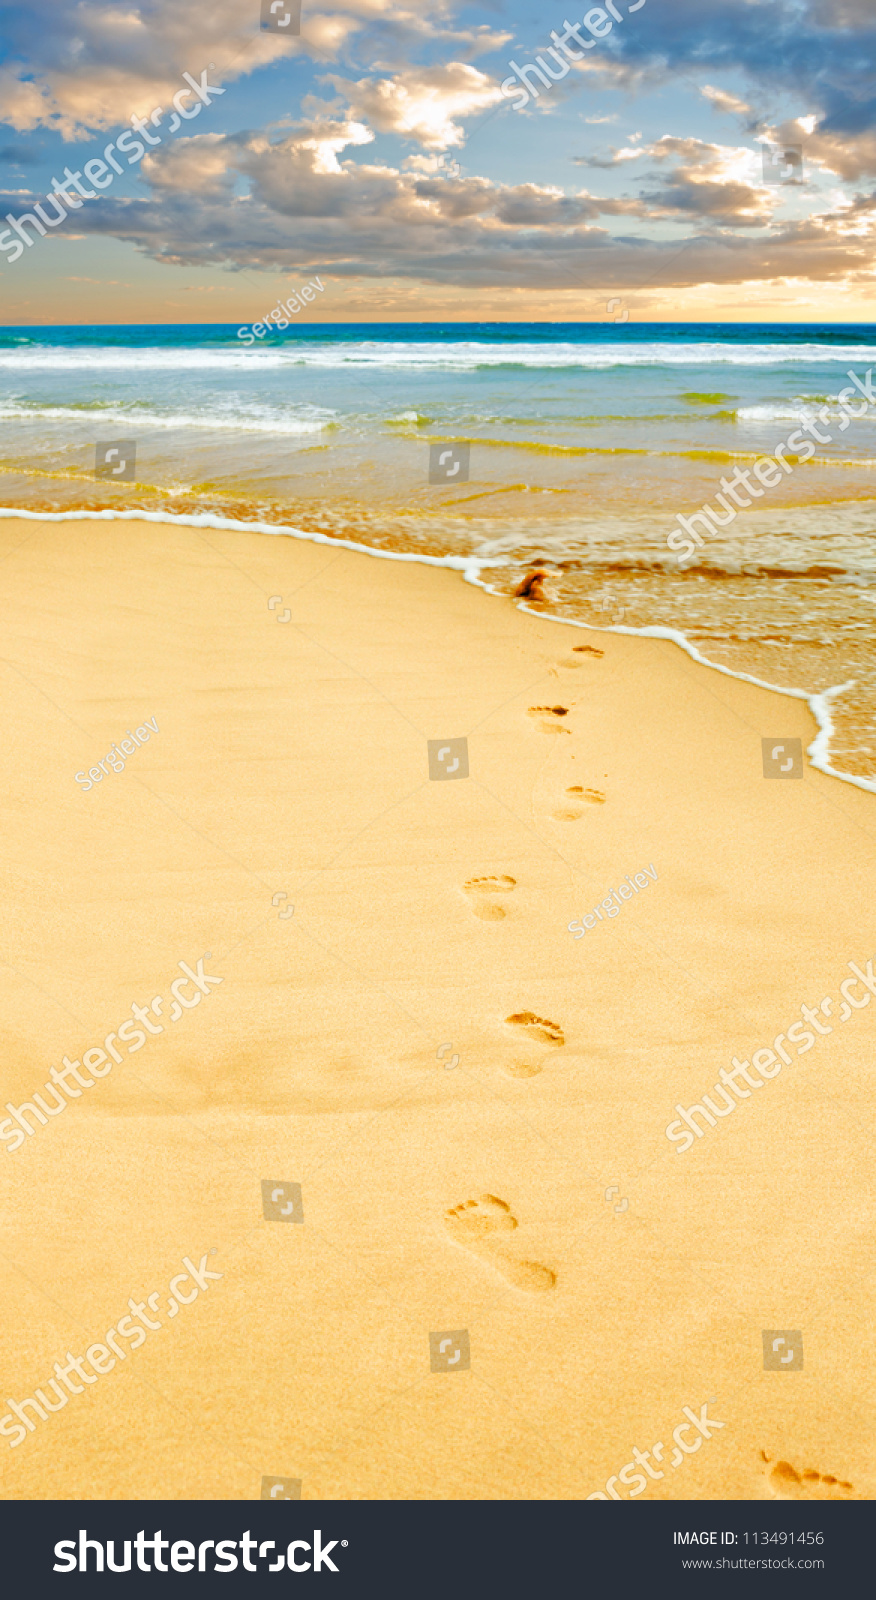 Footprints in the yellow sand, sea in distance. #113491456